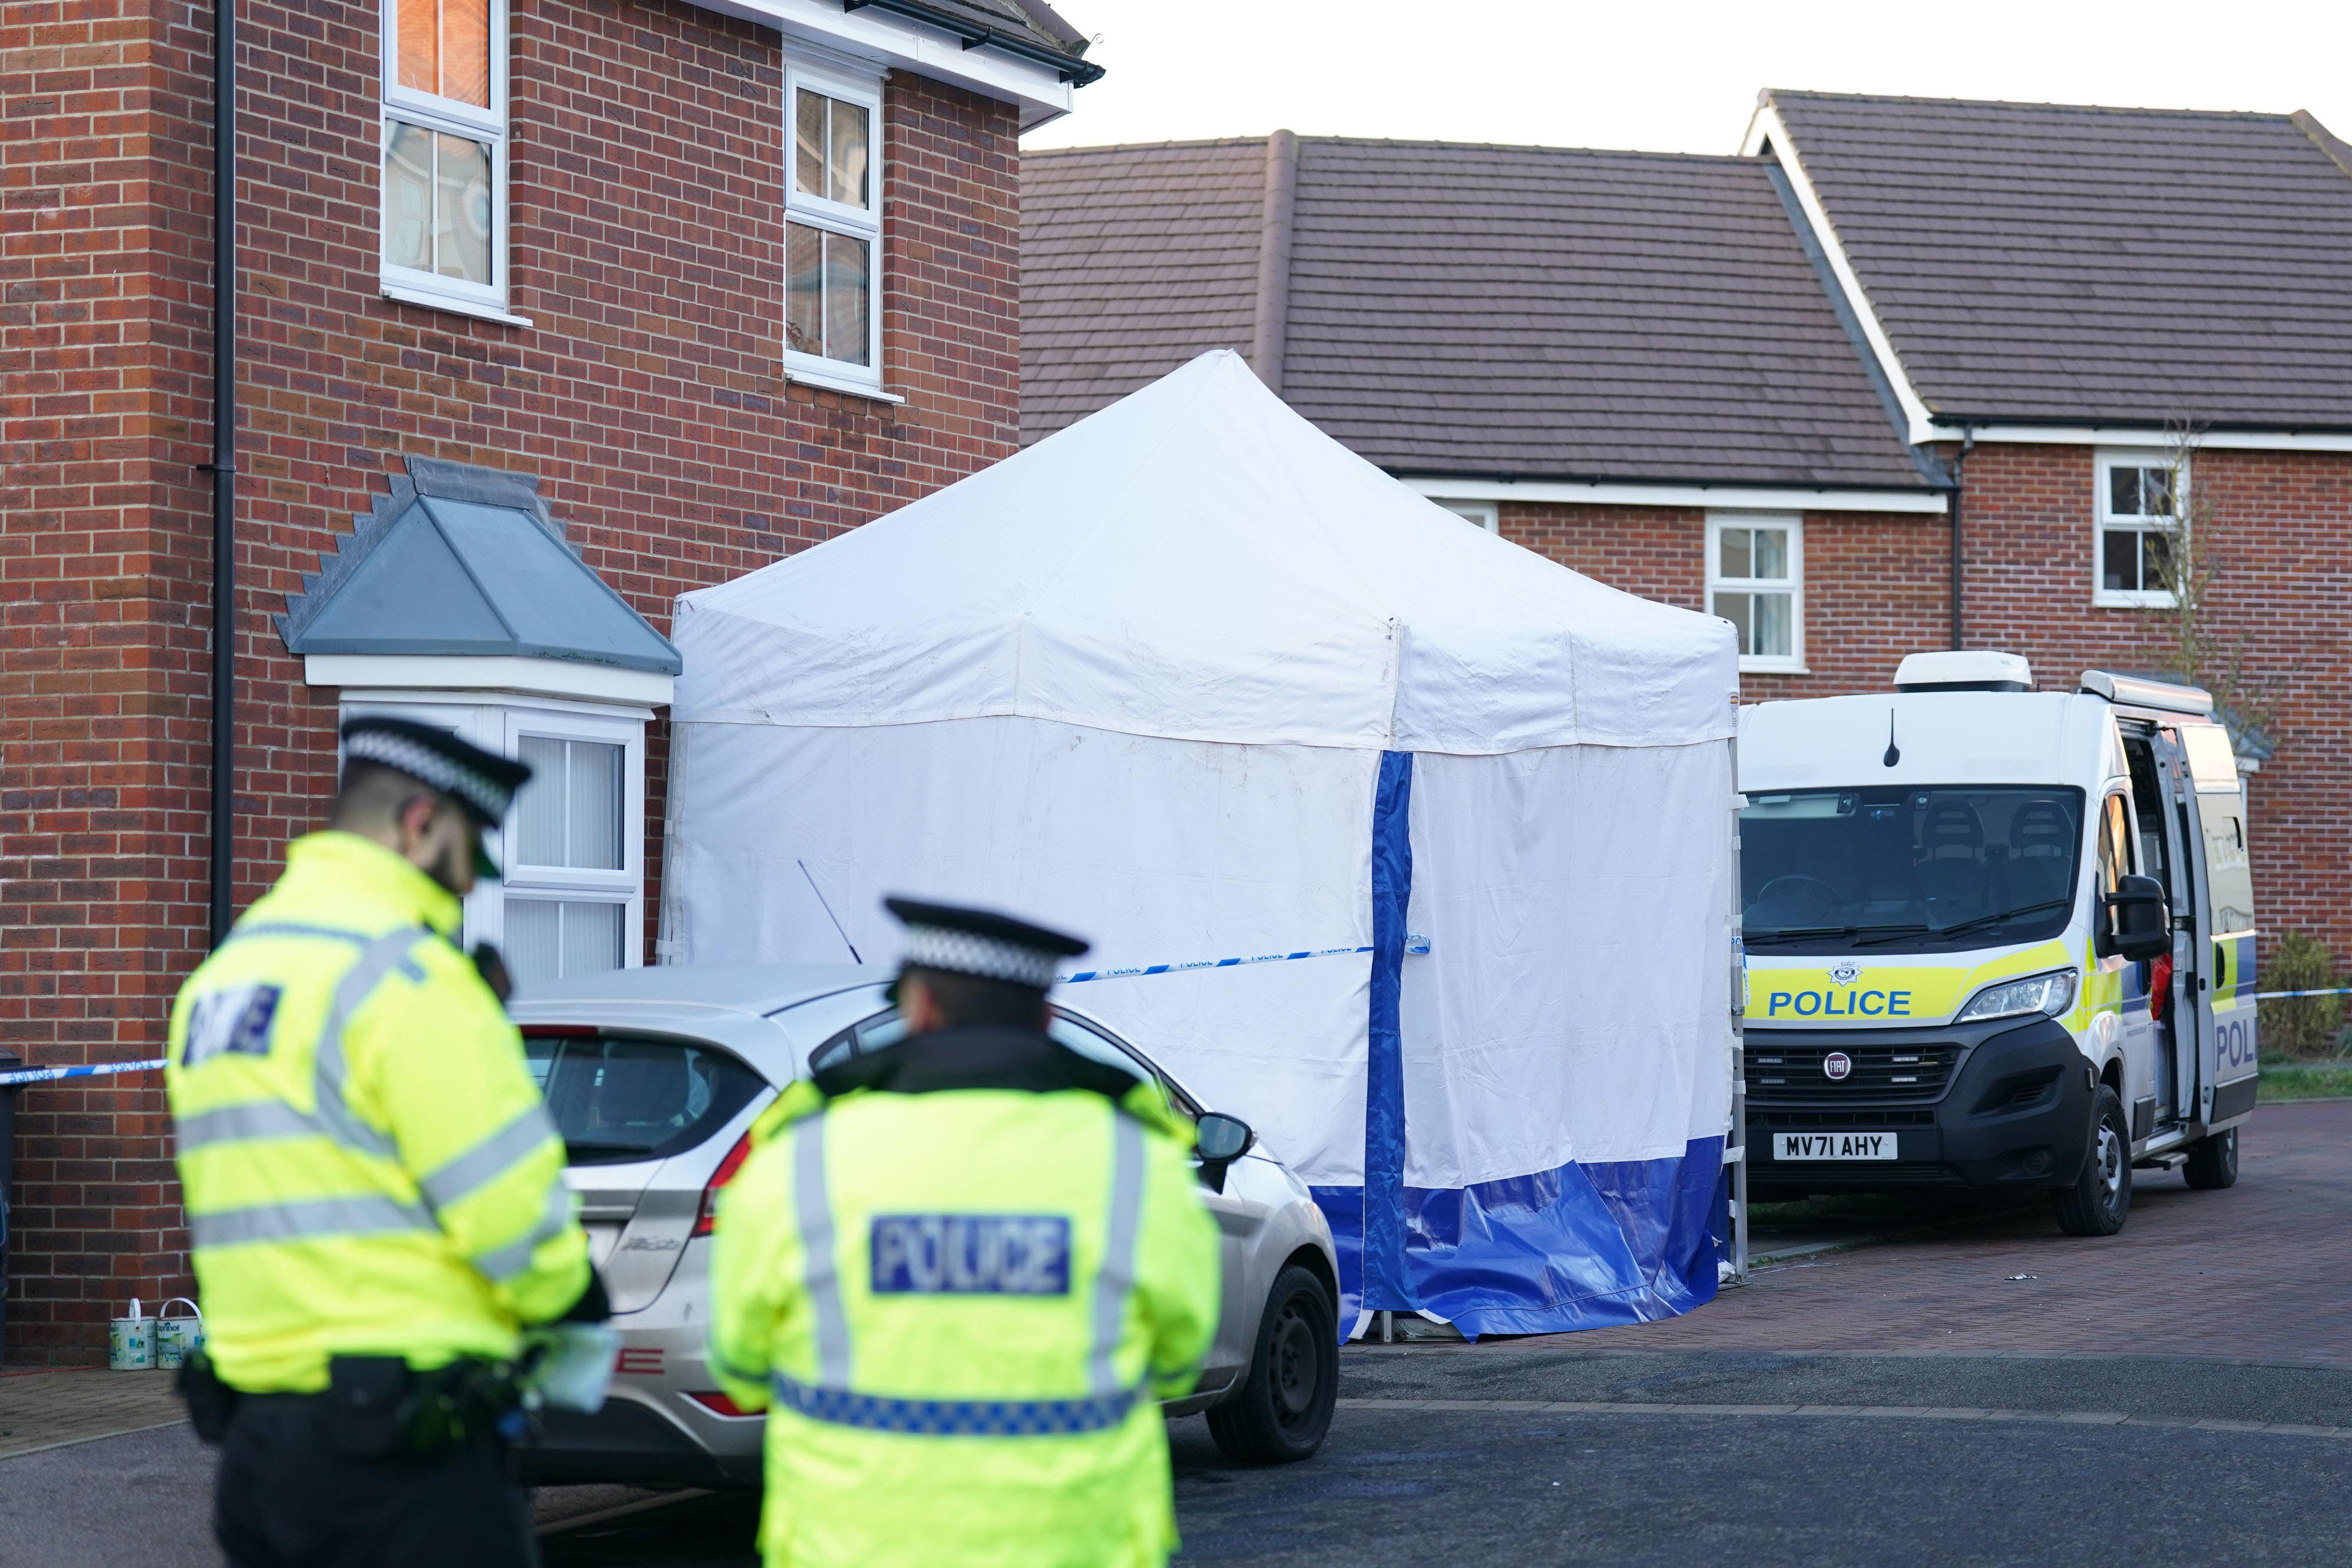 Police outside a house in Costessey near Norwich (PA)